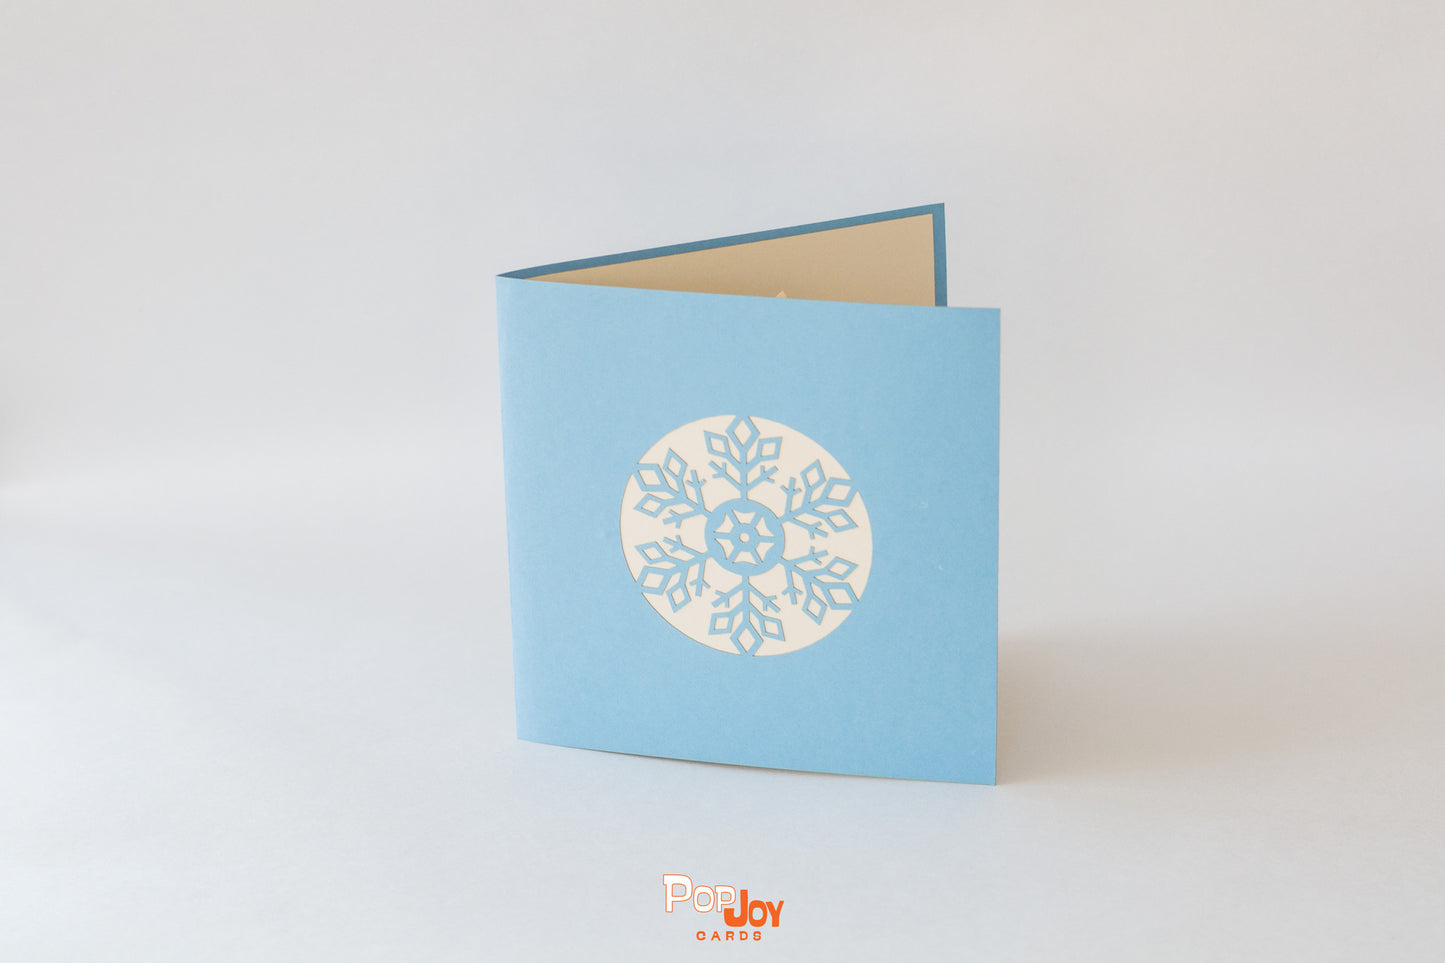 Blue card showing snowflake in white and blue on front cover